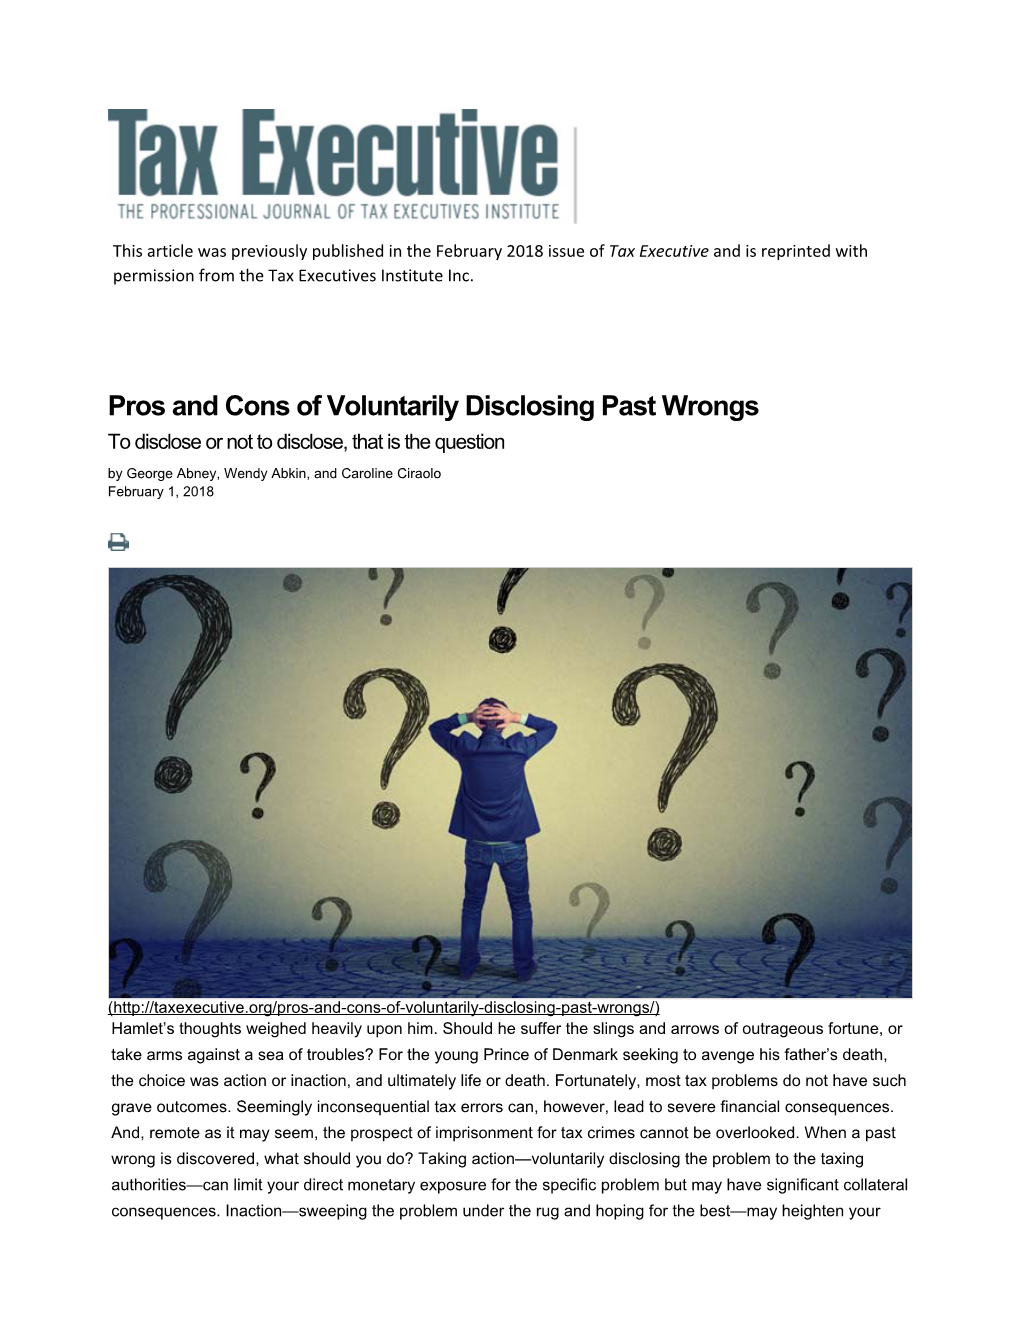 Pros and Cons of Voluntarily Disclosing Past Wrongs | Tax Executive